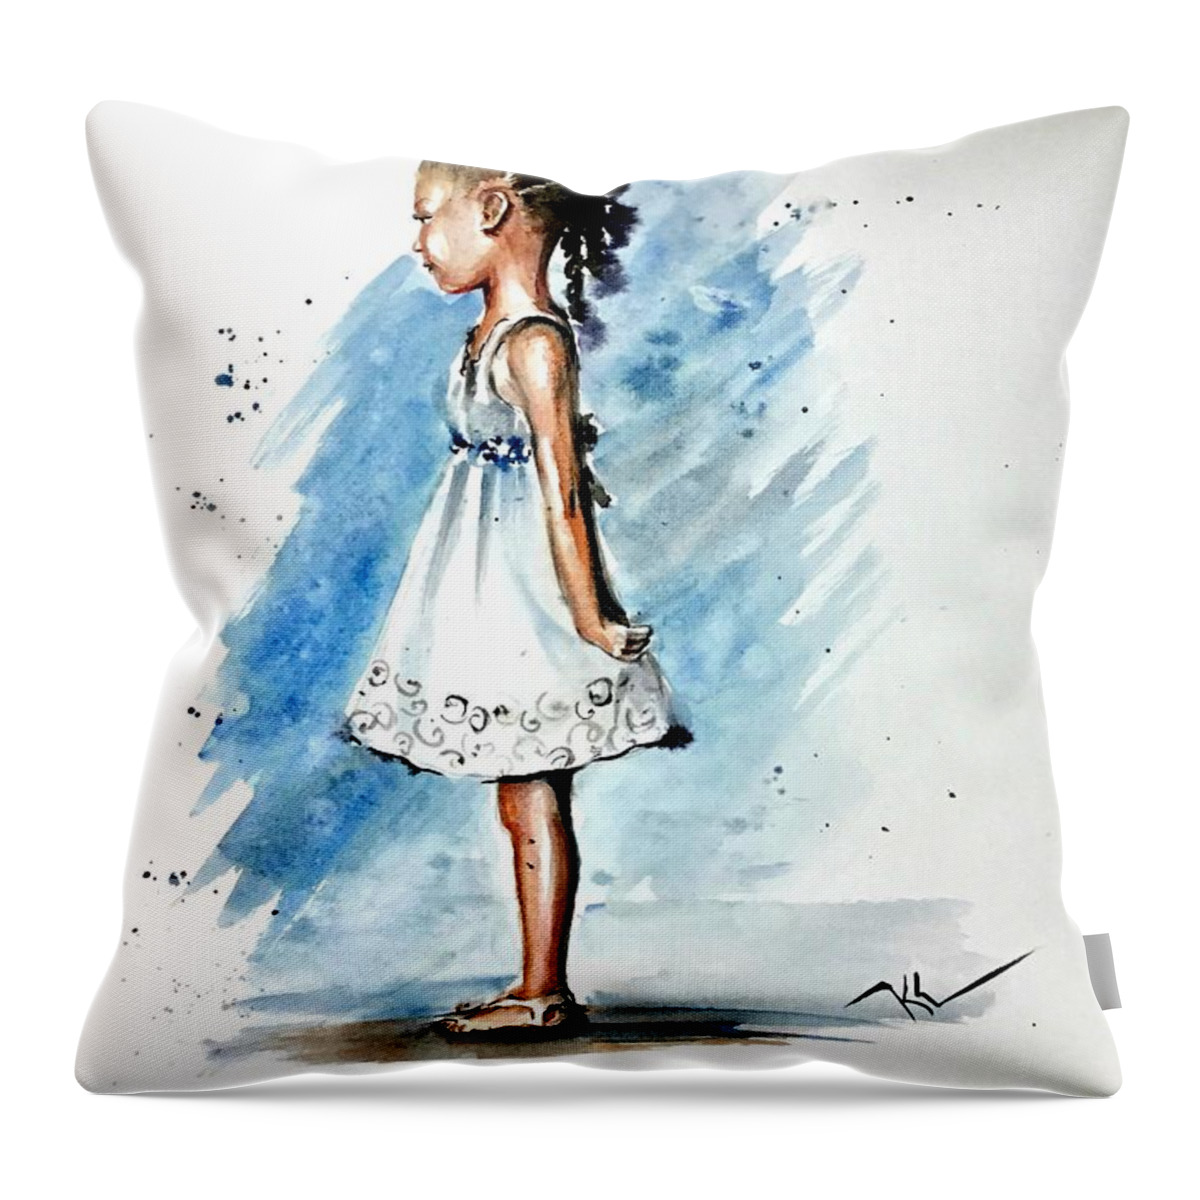 A Girl Throw Pillow featuring the painting Angel by Katerina Kovatcheva